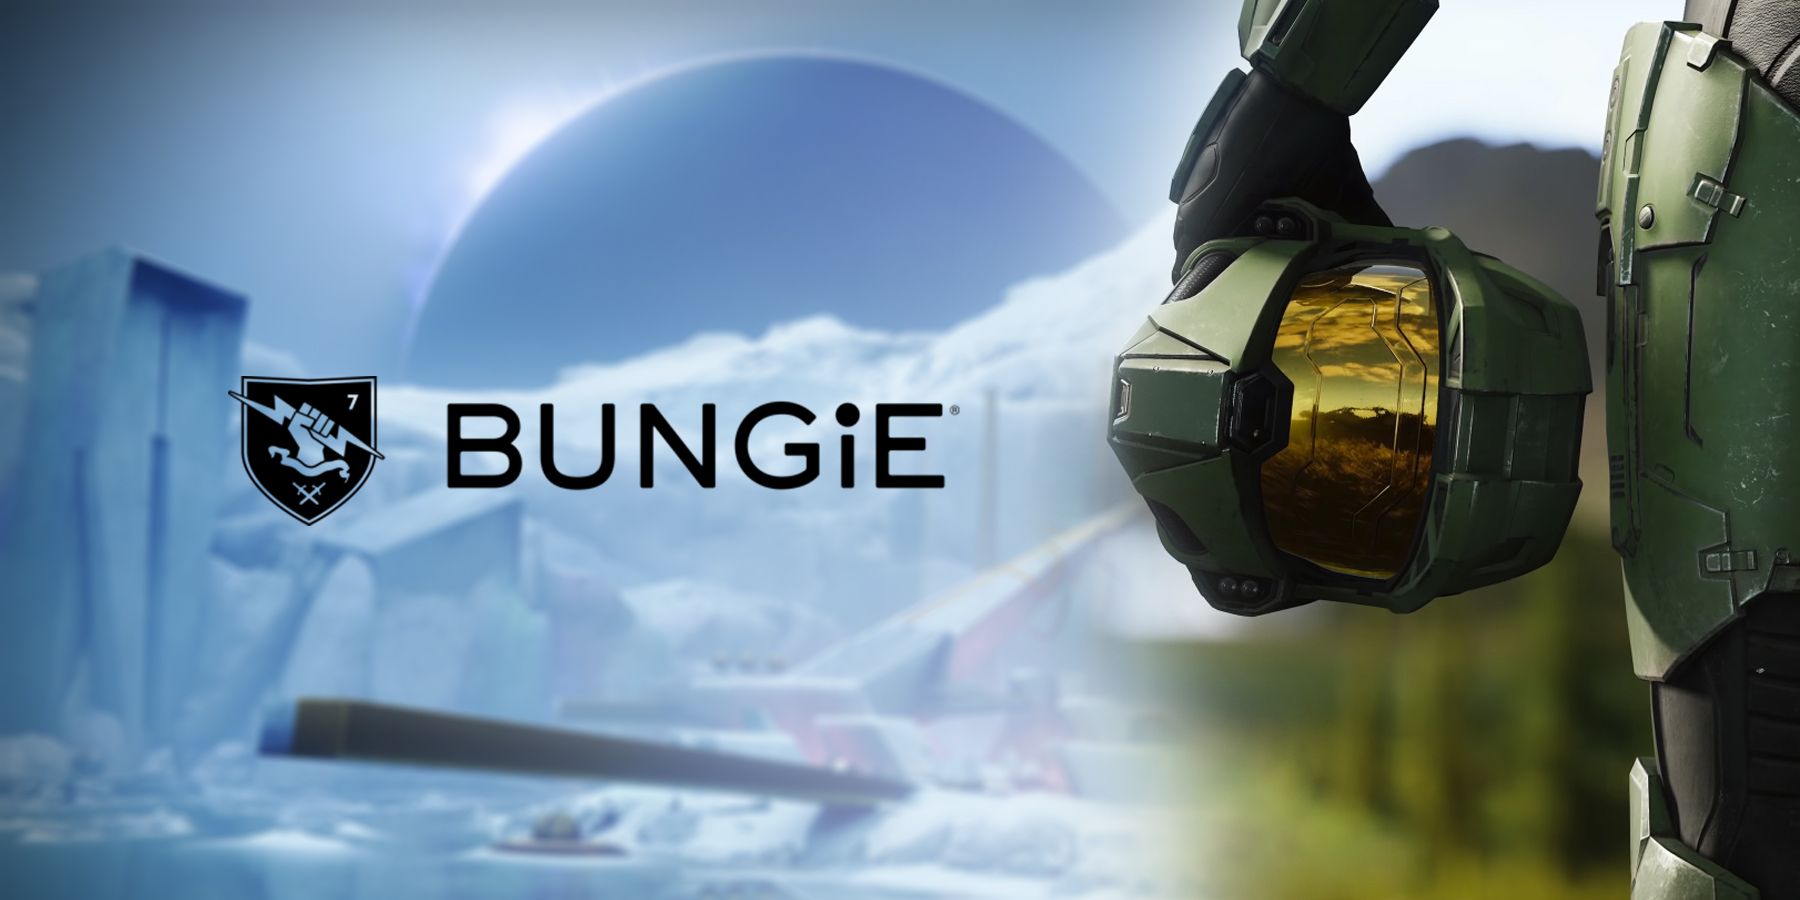 The Bungie logo with the shield alongside Master Chief from Halo and the Dares of Eternity event from Destiny 2 in the background. 